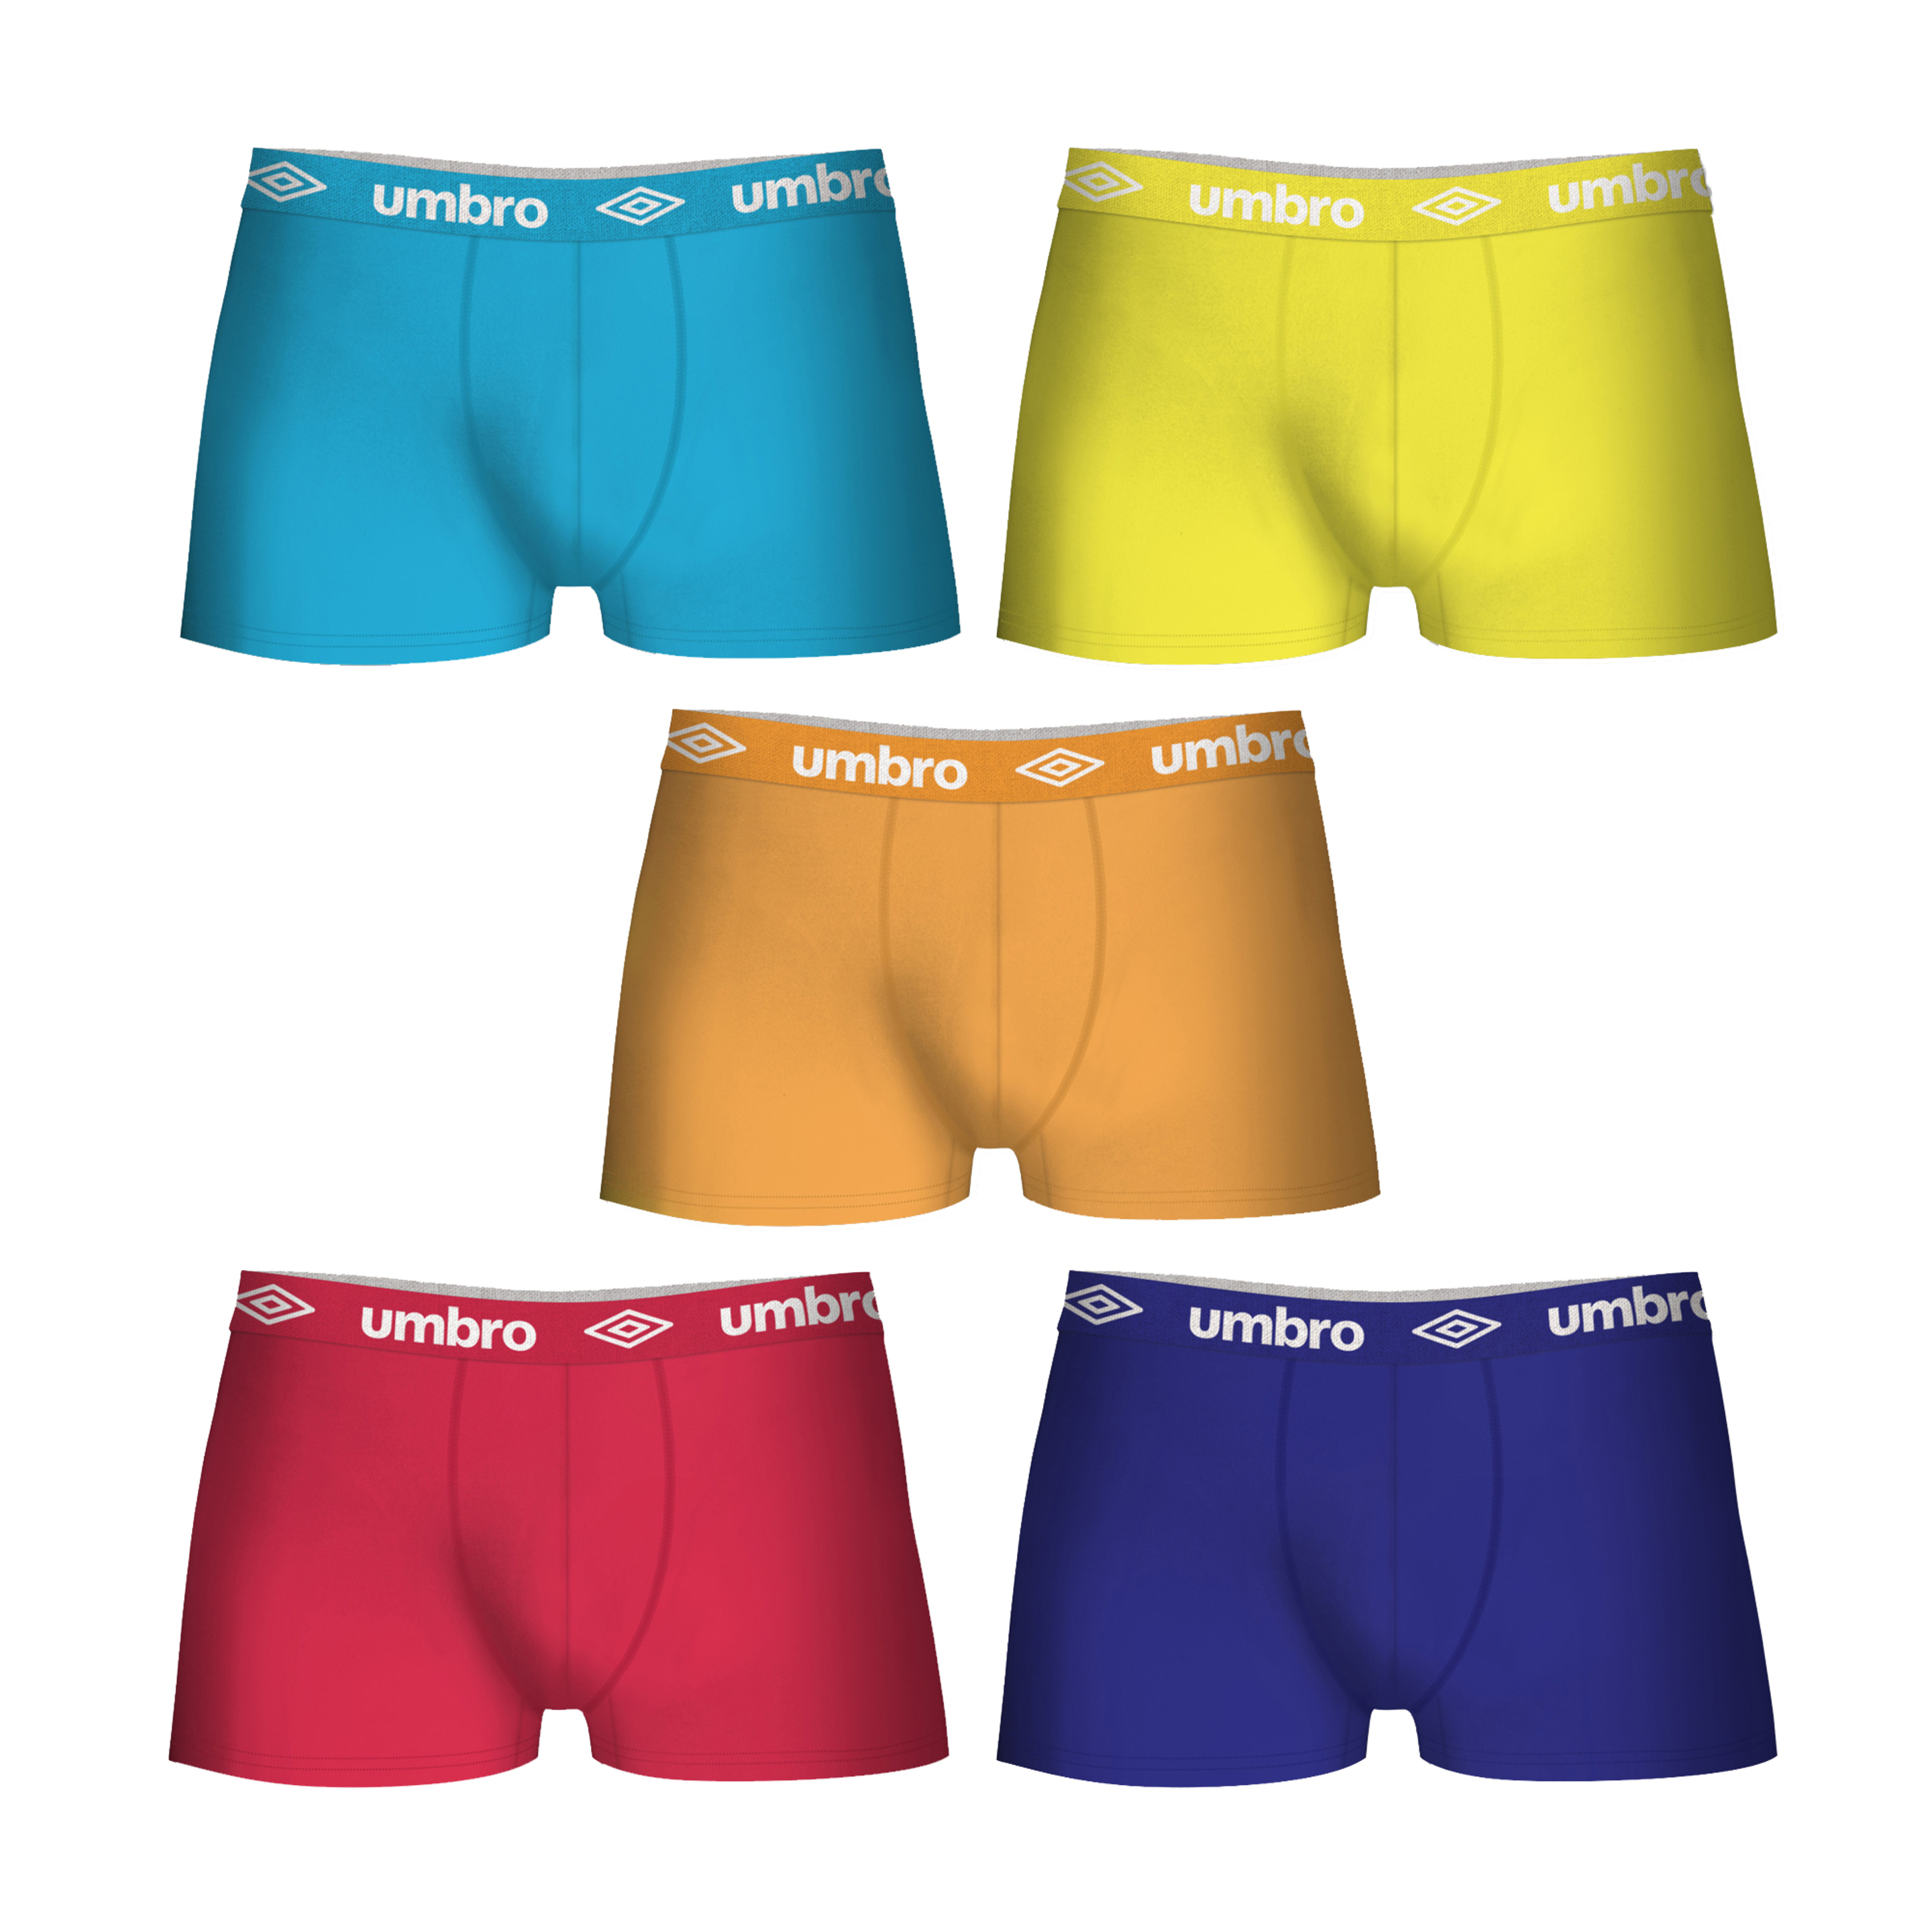 Pack 5 Calzoncillos Umbro - multicolor - 